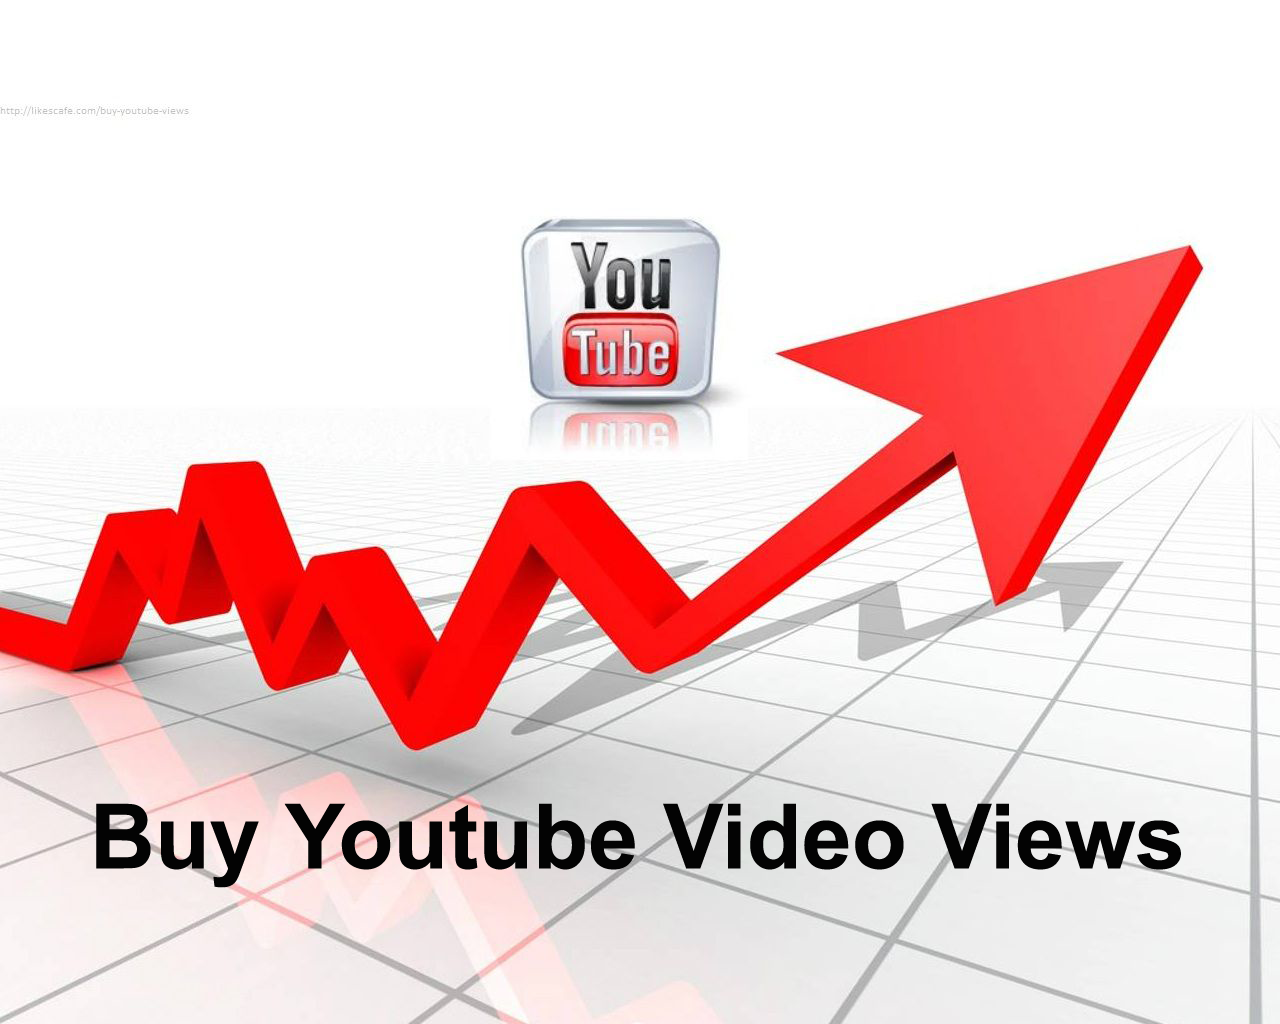 Getting to develop YouTube marketing strategy